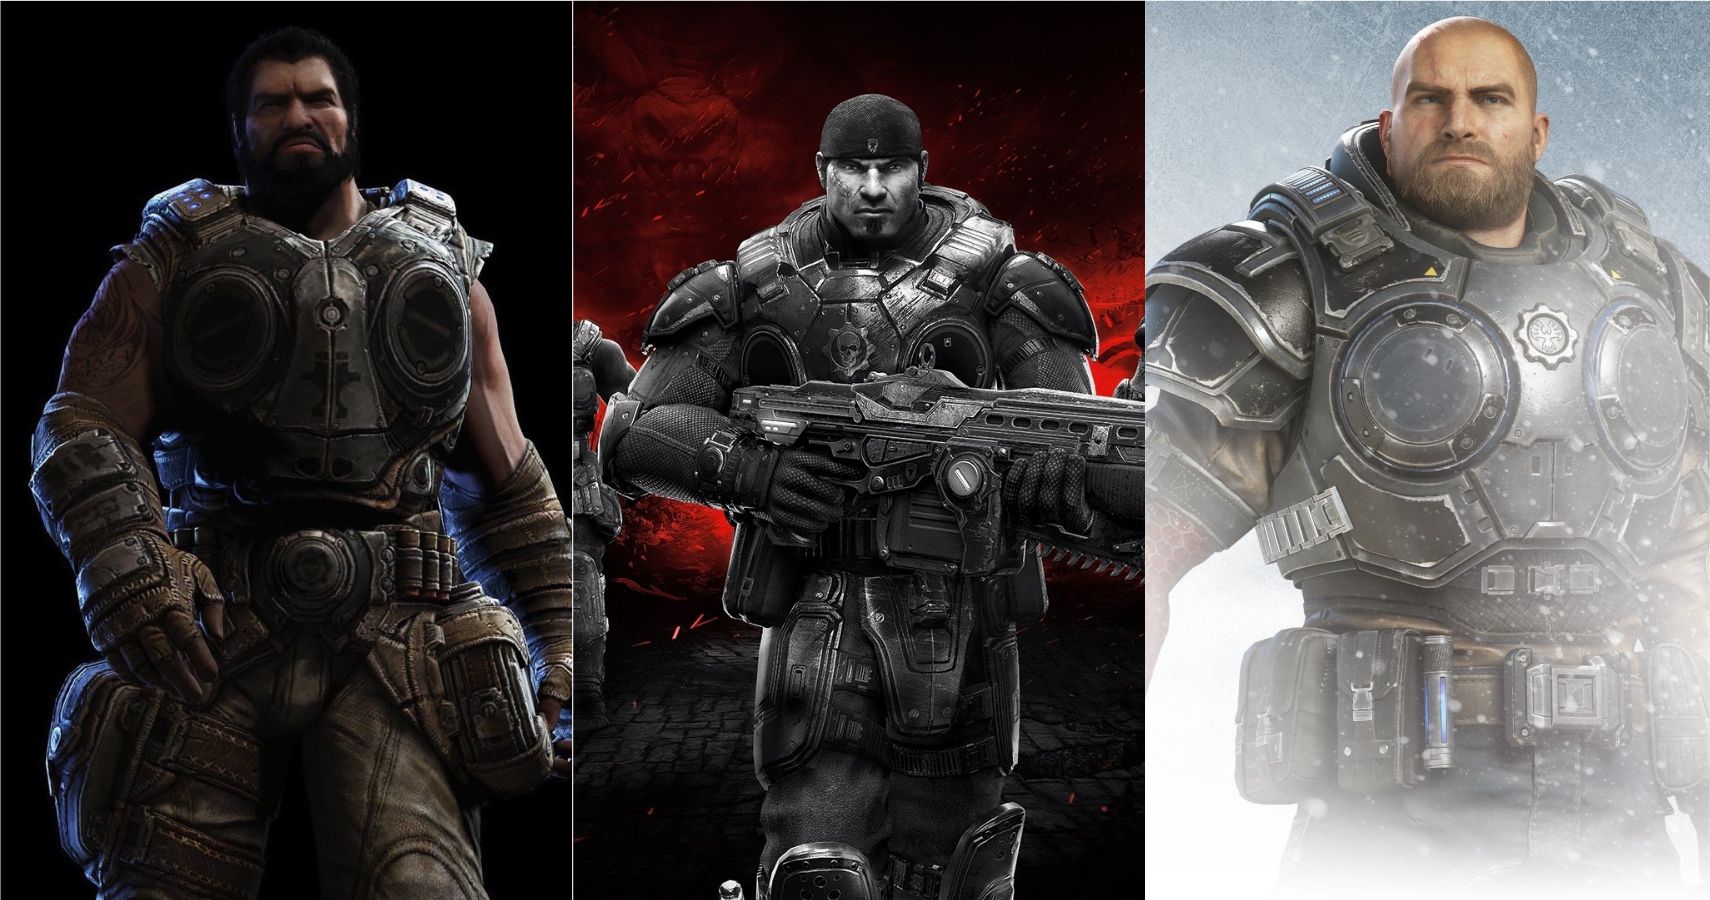 Review: Gears of War 3 is like Band of Brothers with lady warriors